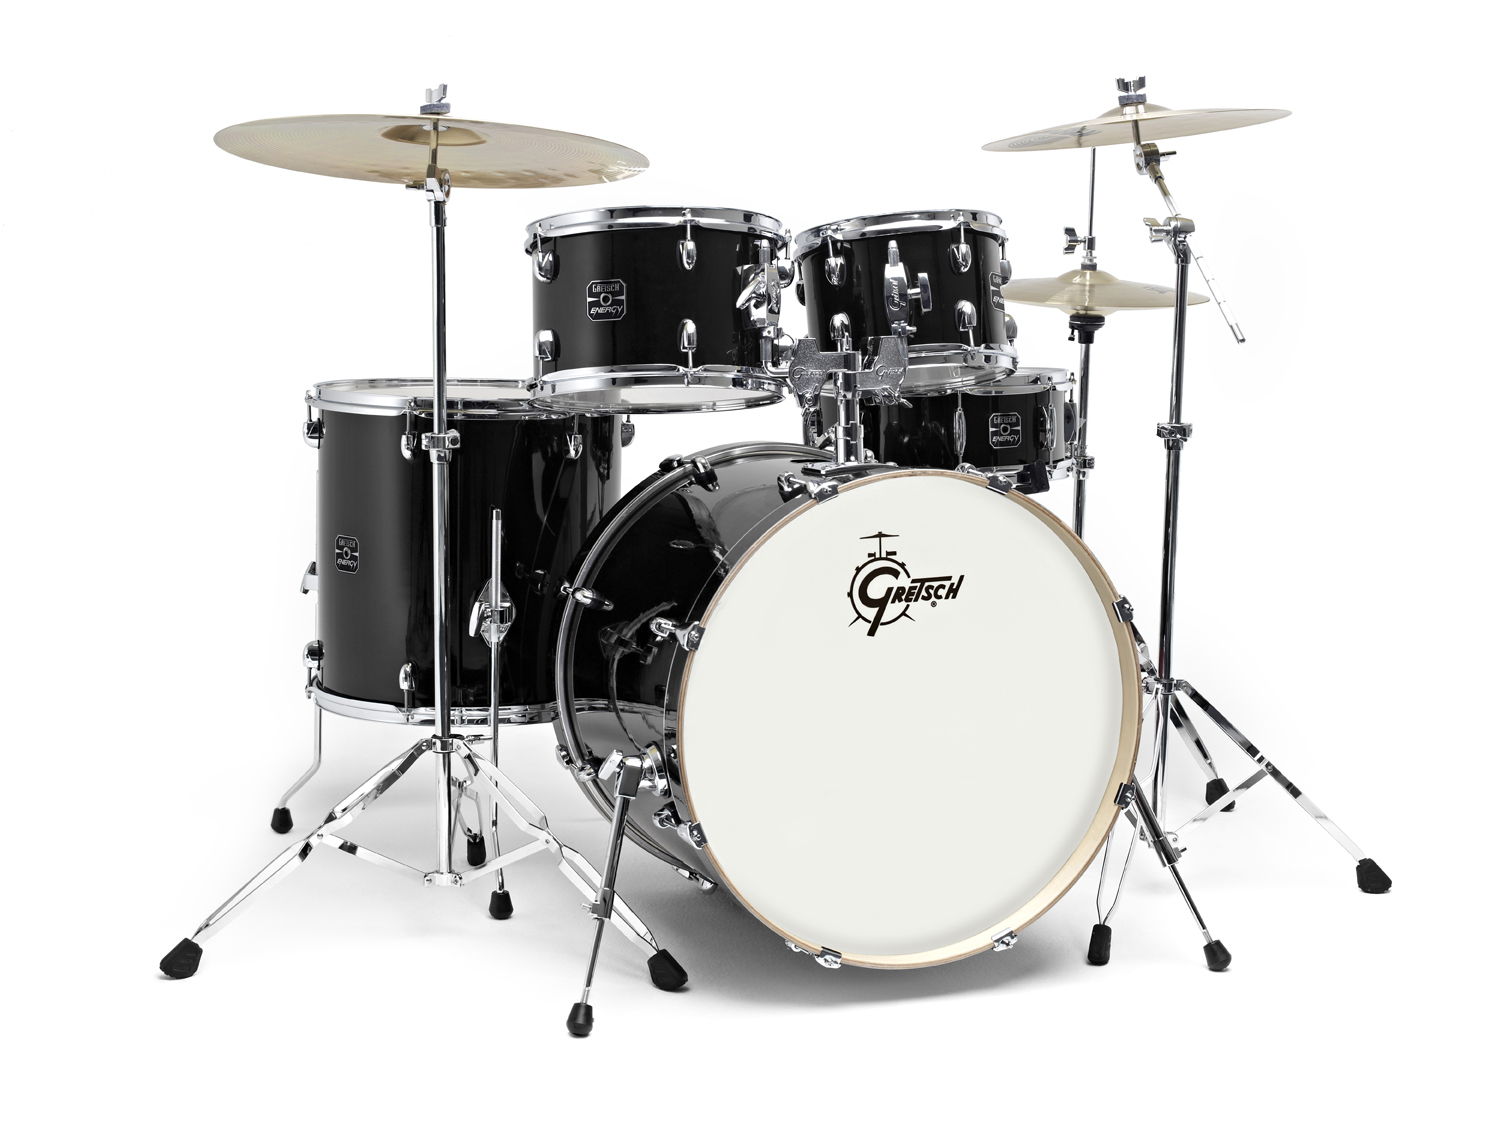 GRETSCH DRUMS NEW ENERGY STAGE 22 BLACK + CYMBALES PAISTE 101